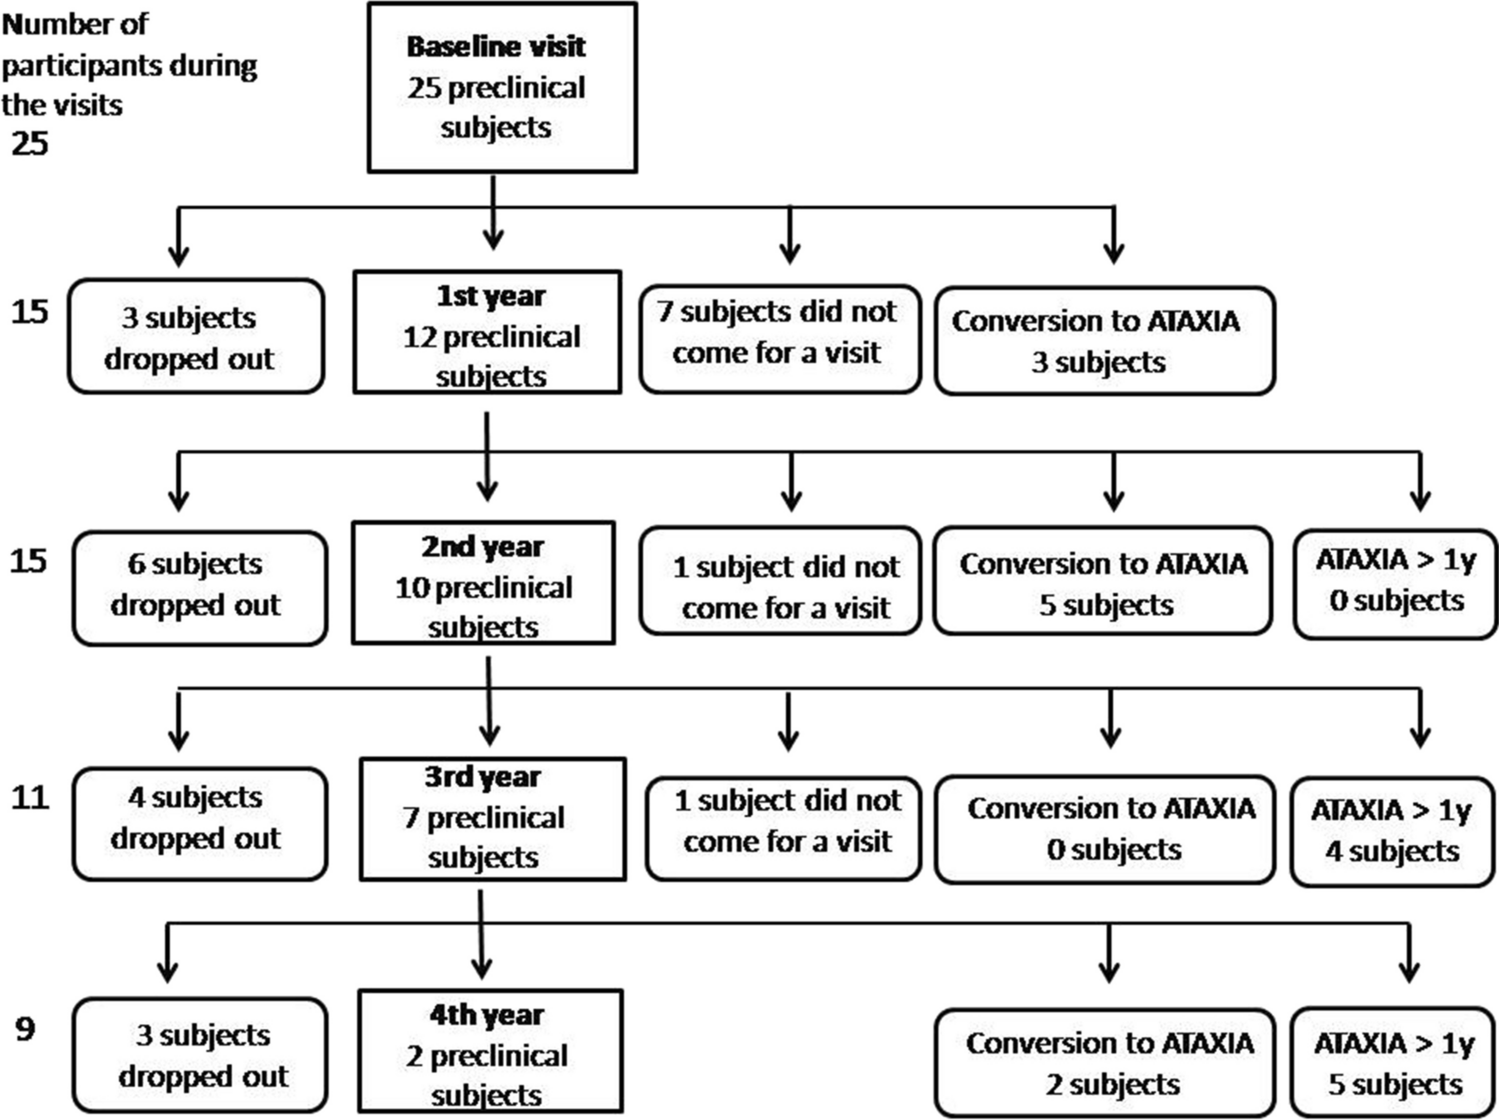 Quantitative Evaluation of Stance as a Sensitive Biomarker of Postural Ataxia Development in Preclinical SCA1 Mutation Carriers